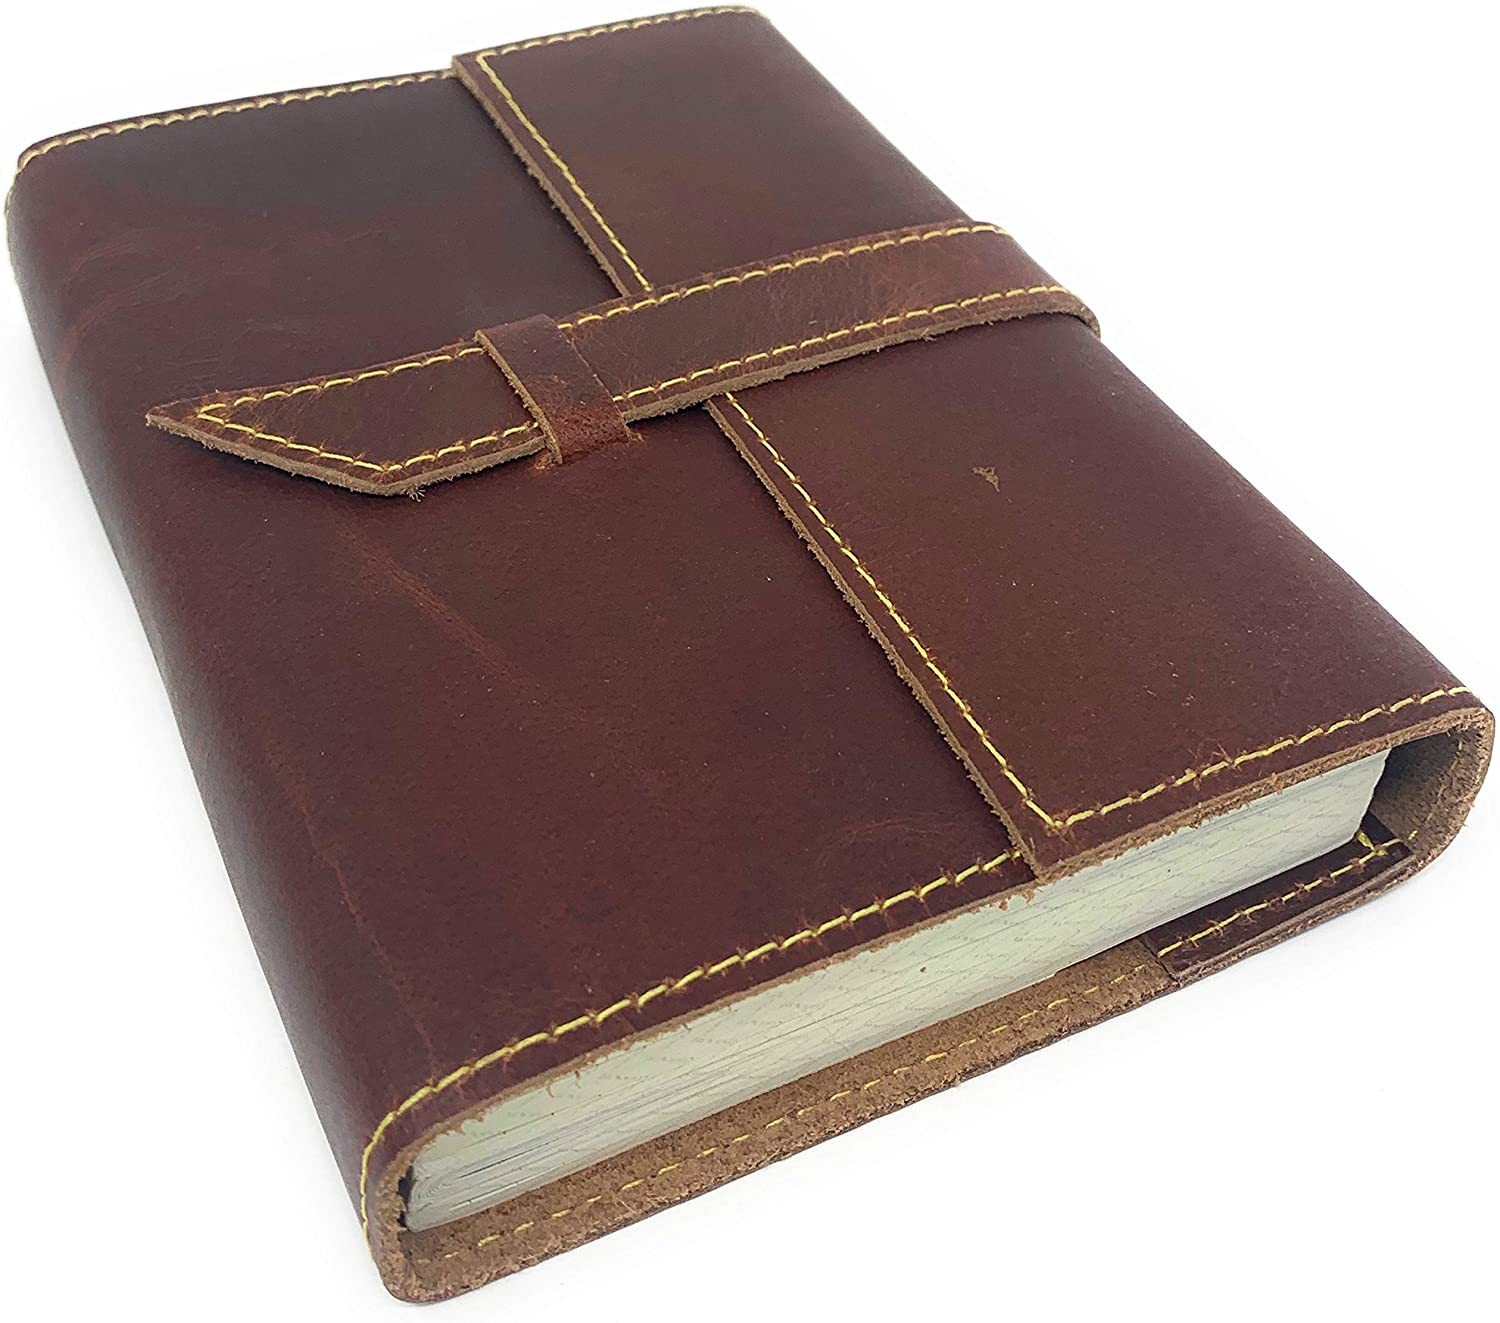 Tuk Tuk Press®  Handmade Leather Journal, 200 Tree Free Thick Recycled Cotton Dotted Pages, Refillable